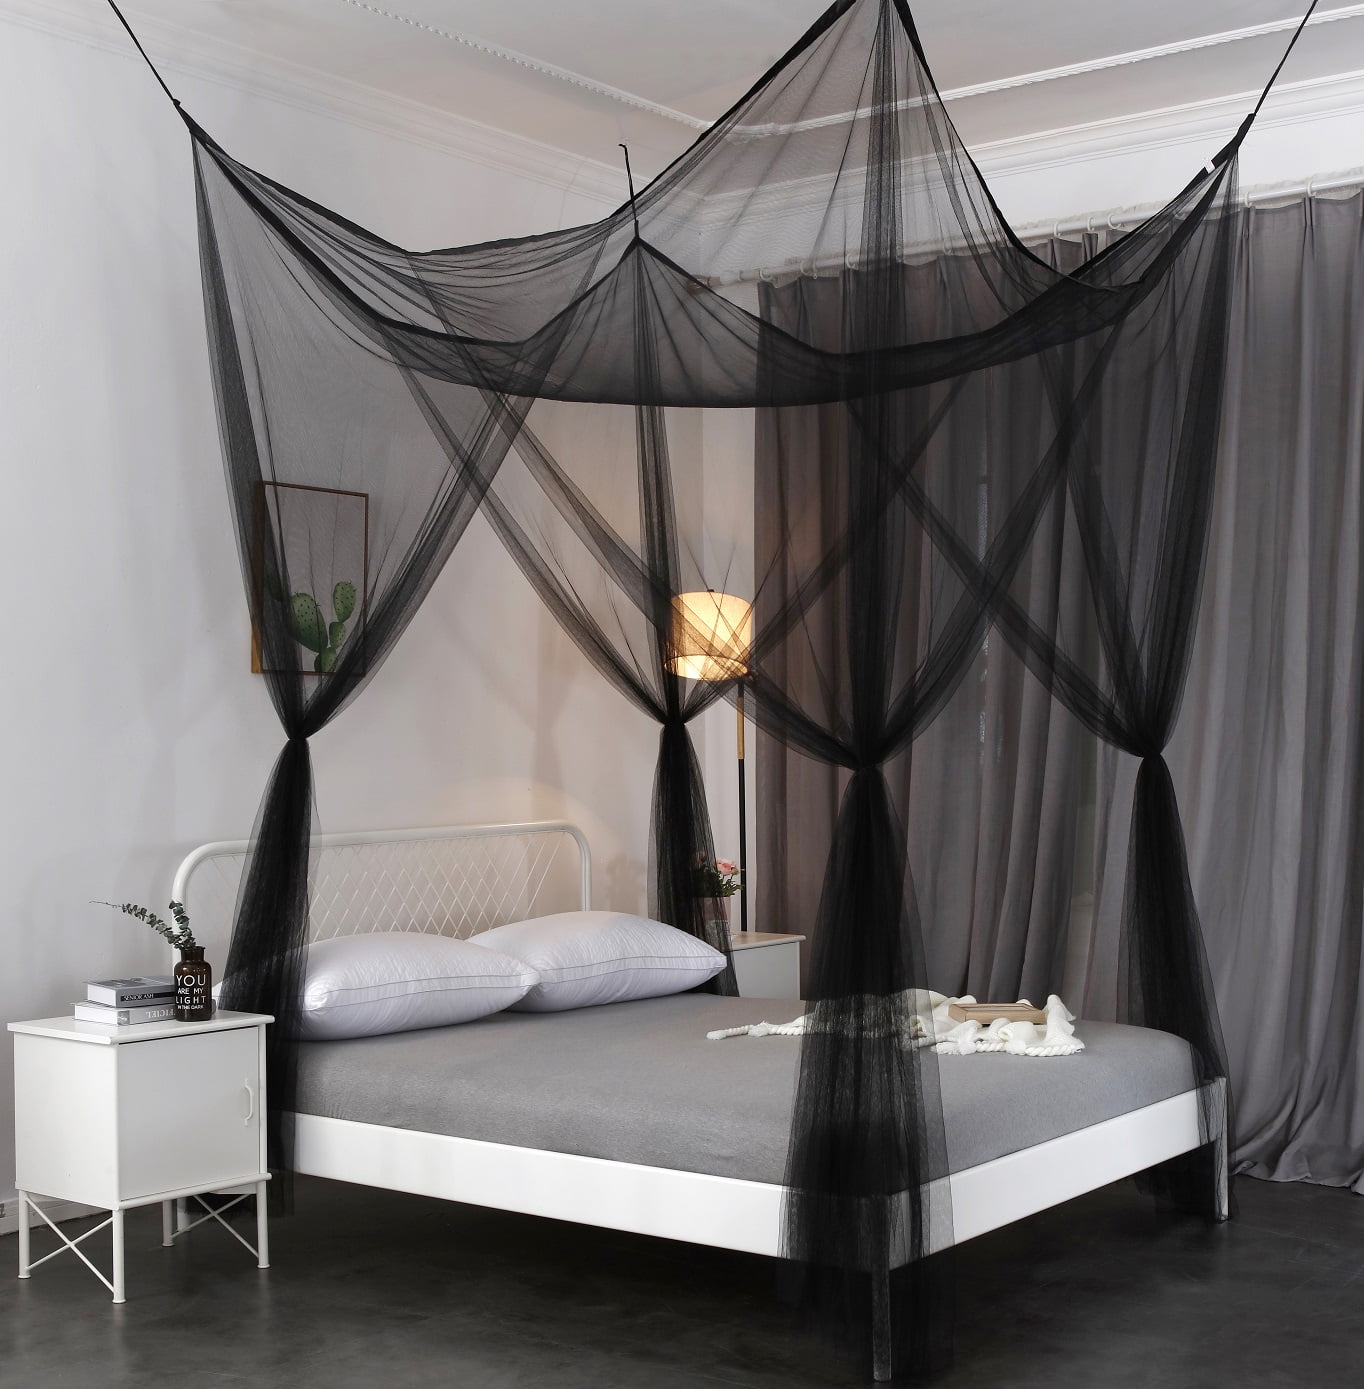 4 Corner Post Bed Canopy Mosquito Net Insert Netting Full Queen King Size Home 